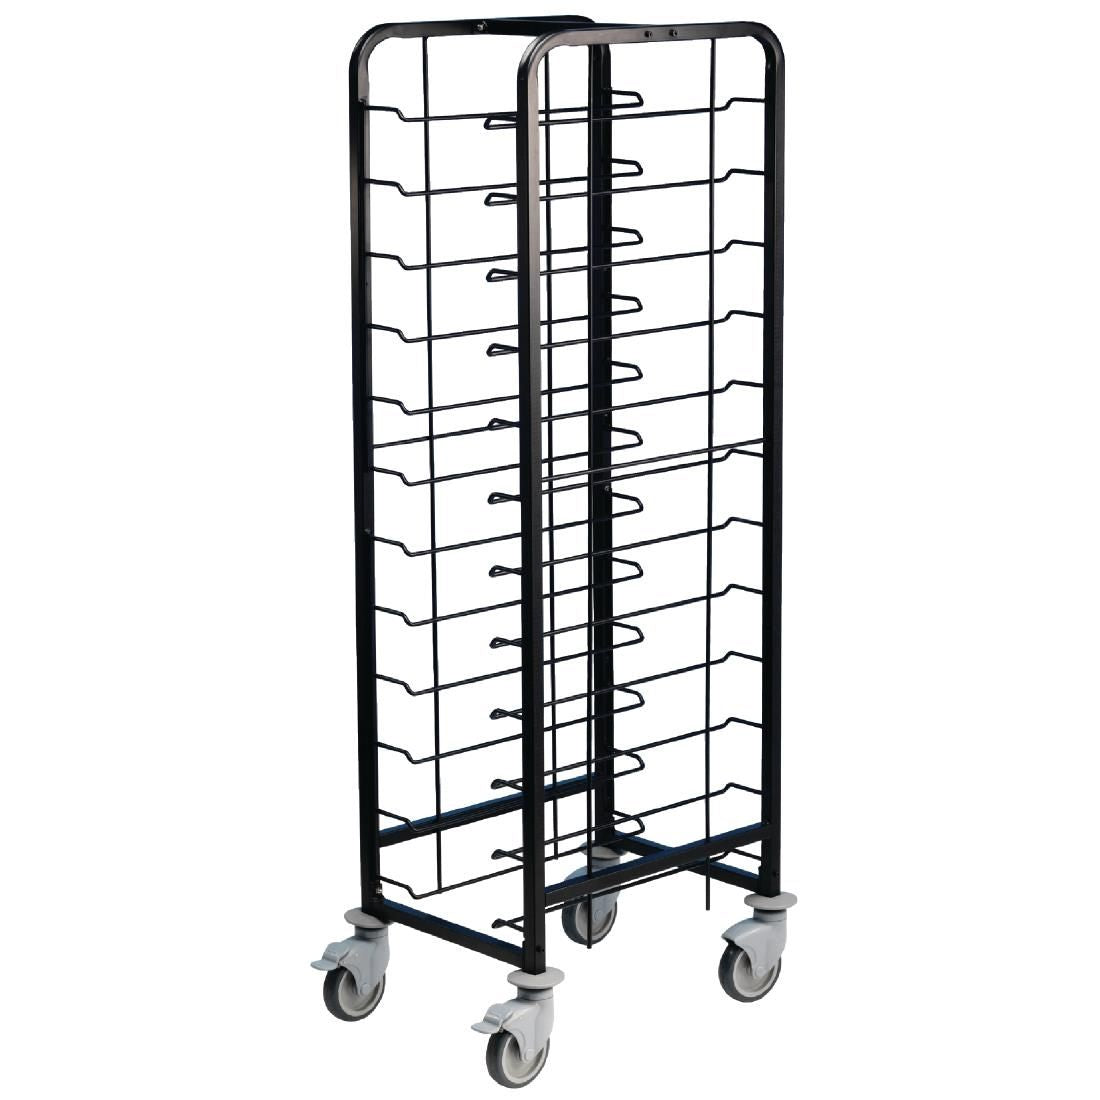 DP290 EAIS Powder Coated Enamel Clearing Trolley 12 Shelves JD Catering Equipment Solutions Ltd